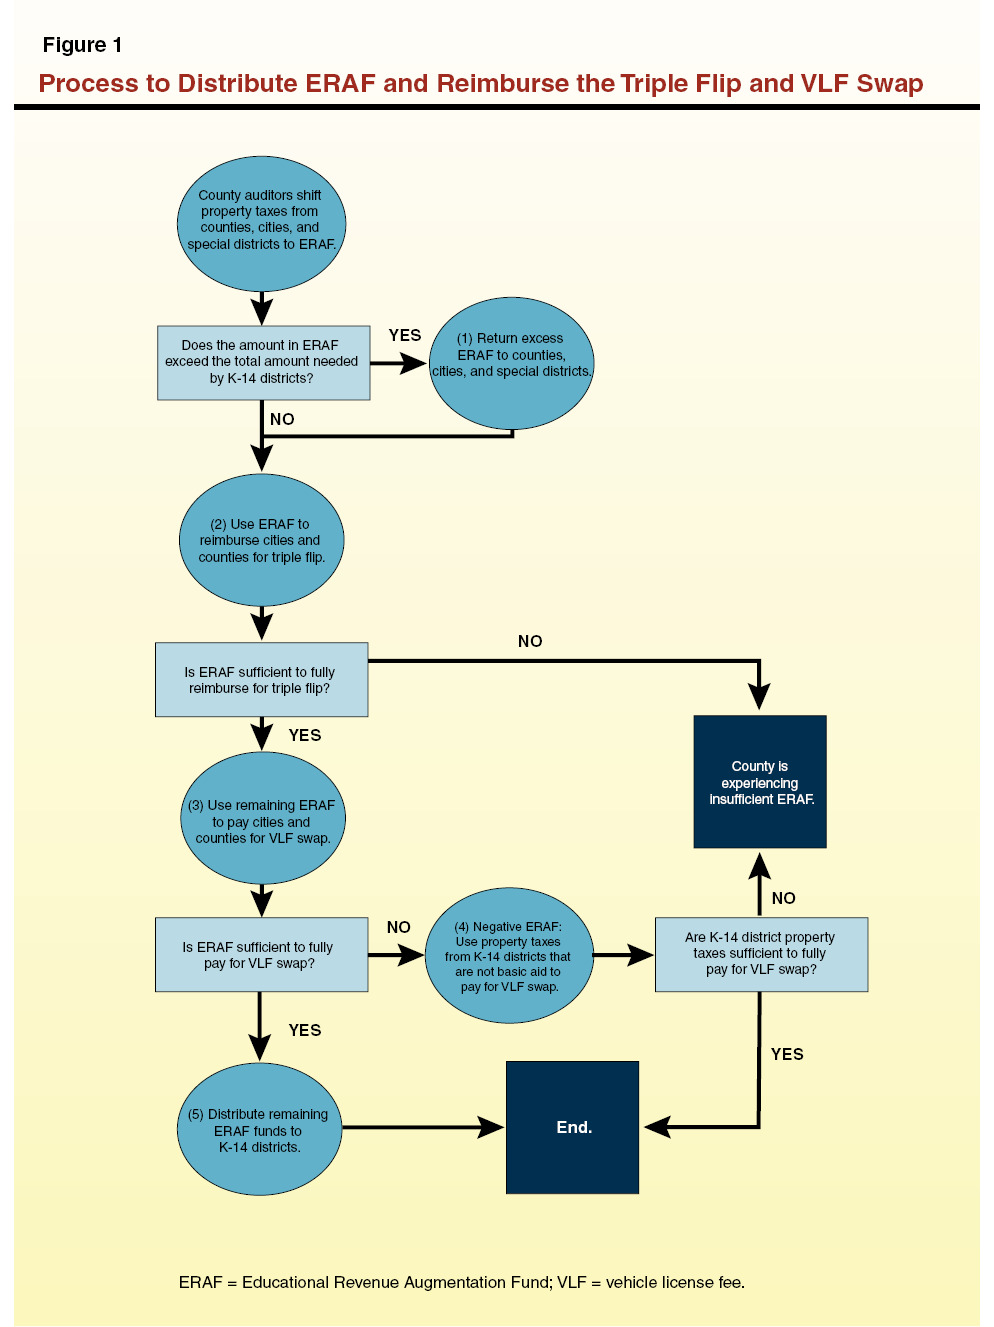 Process to Distribute ERAF and Reimburse and Triple Flip and VLF Swap.png